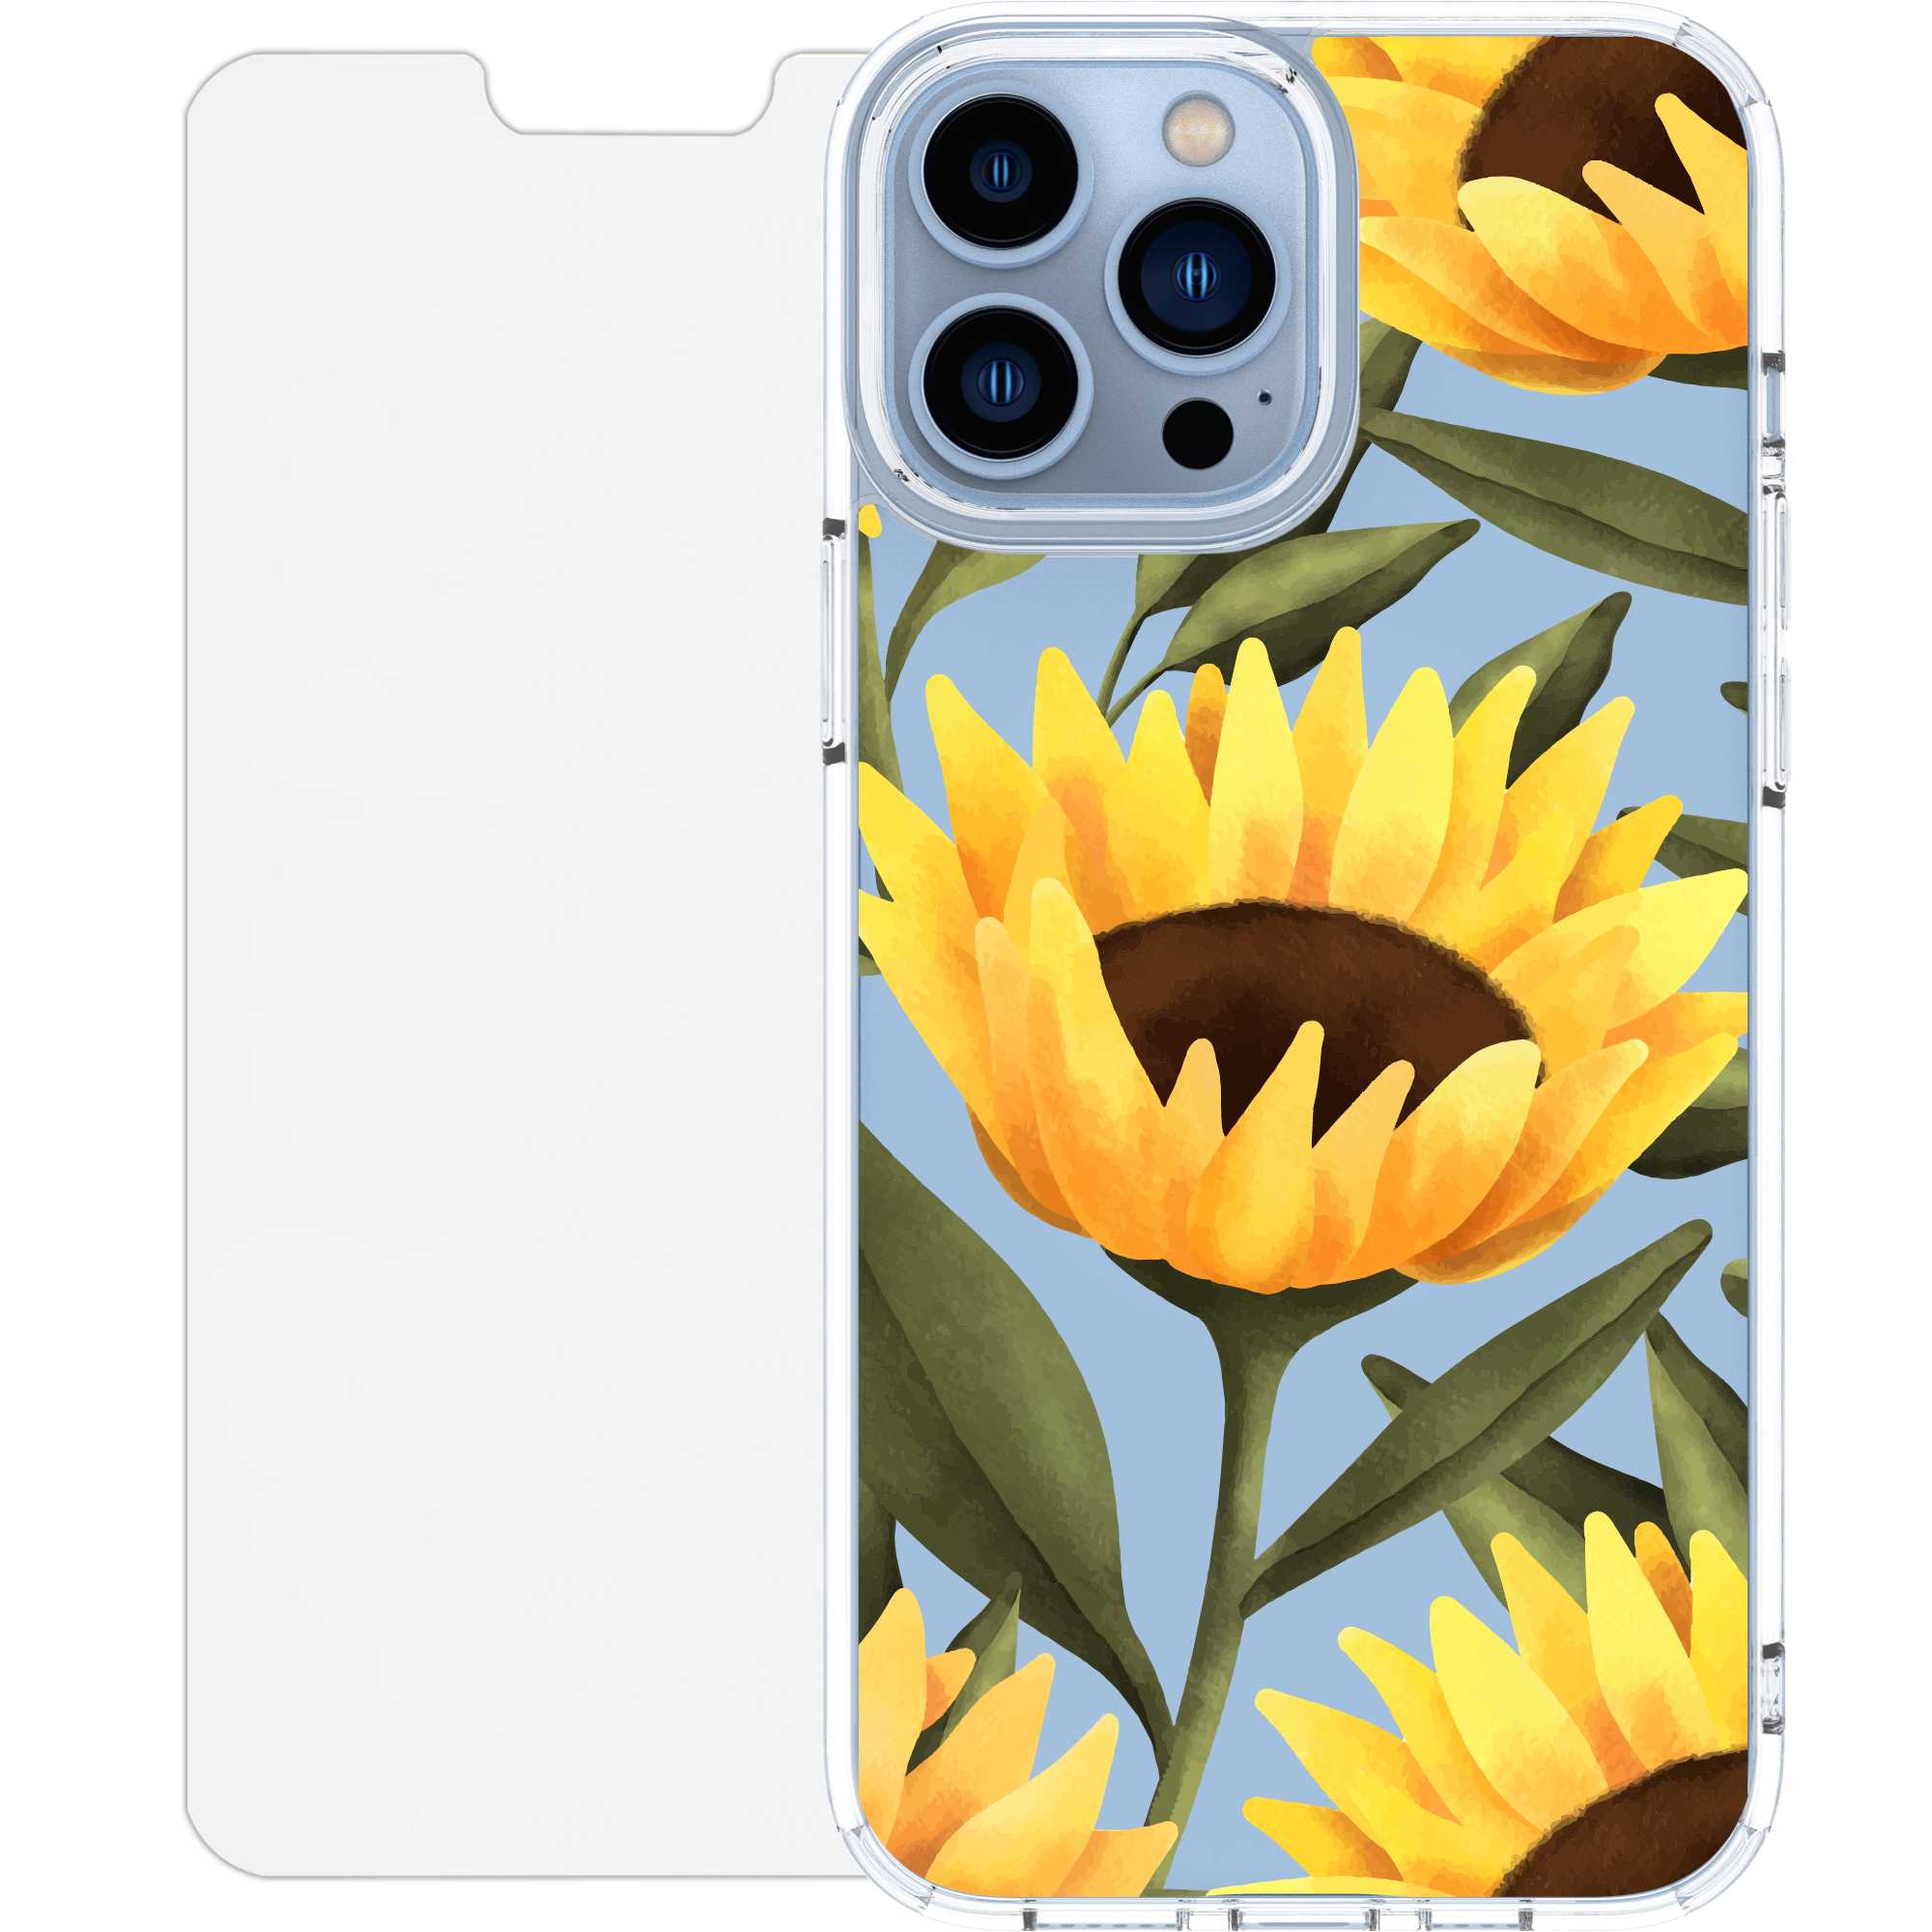 Scooch CrystalCase for iPhone 13 Pro Max BloomingSunflowers Scooch CrystalCase